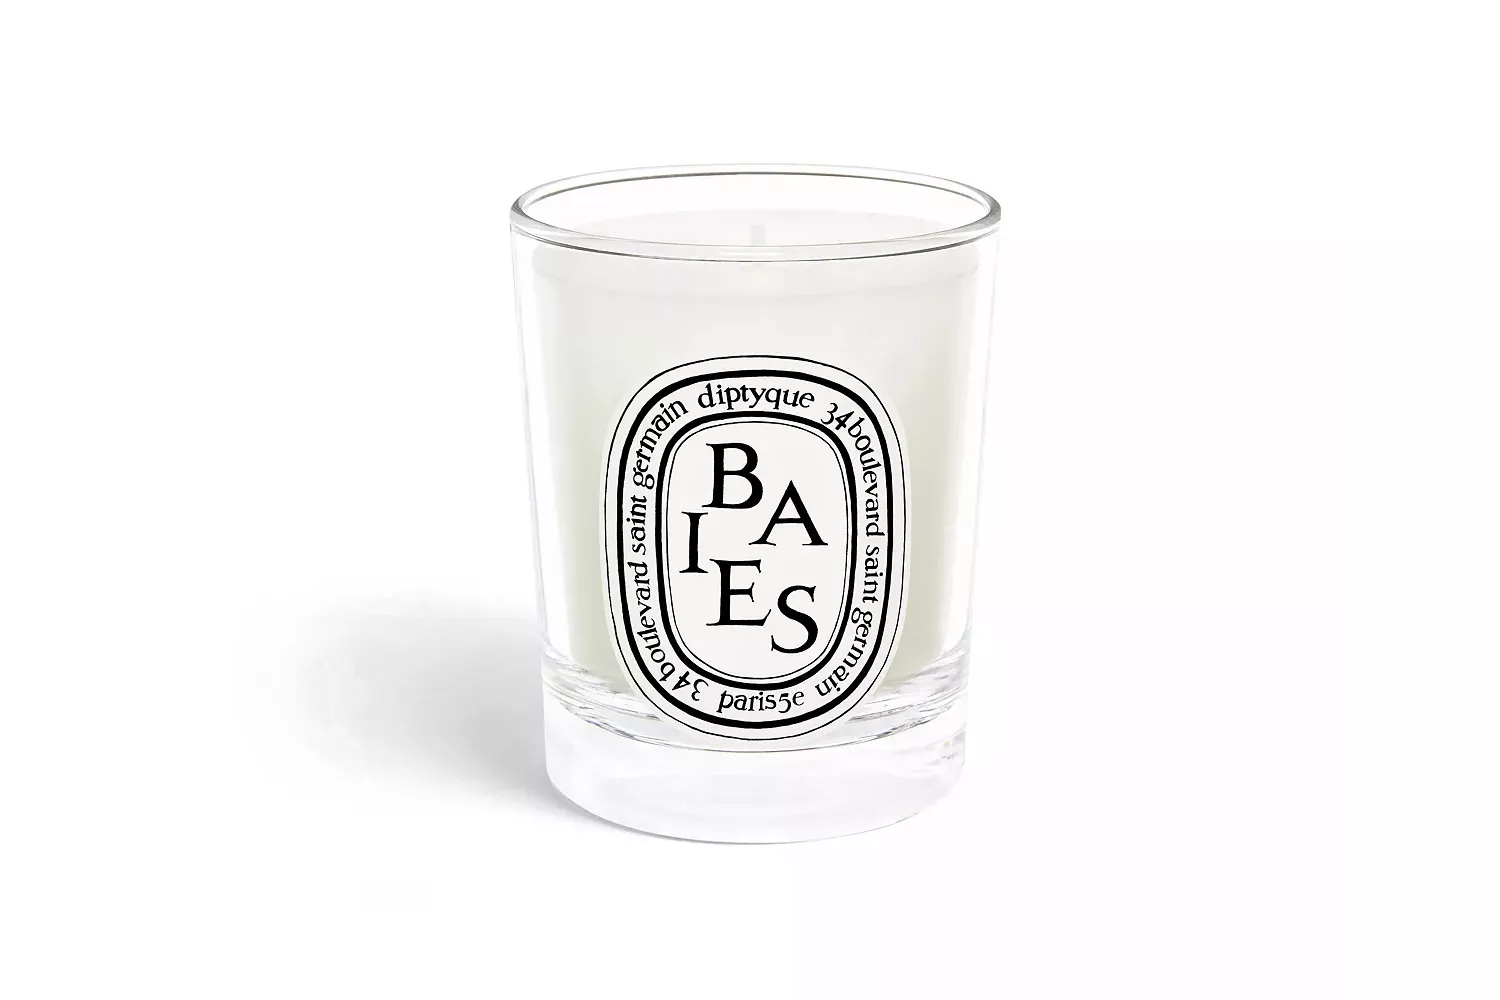 Baies Scented Candle